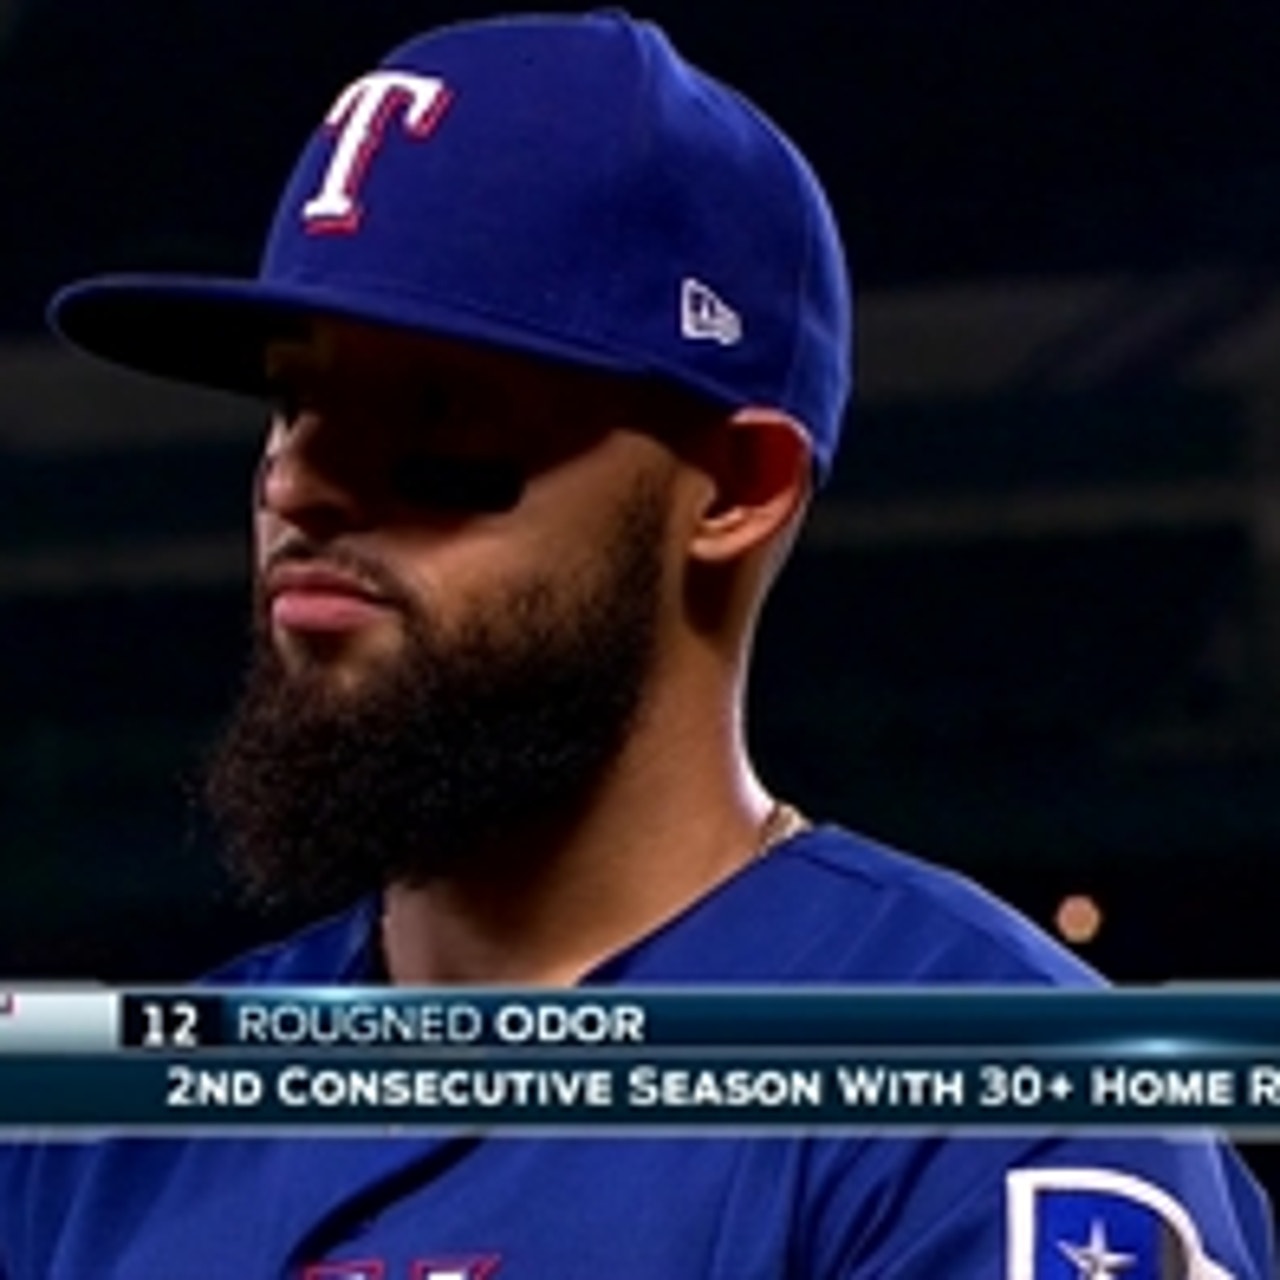 Rougned Odor in a Yankees jersey : r/baseball